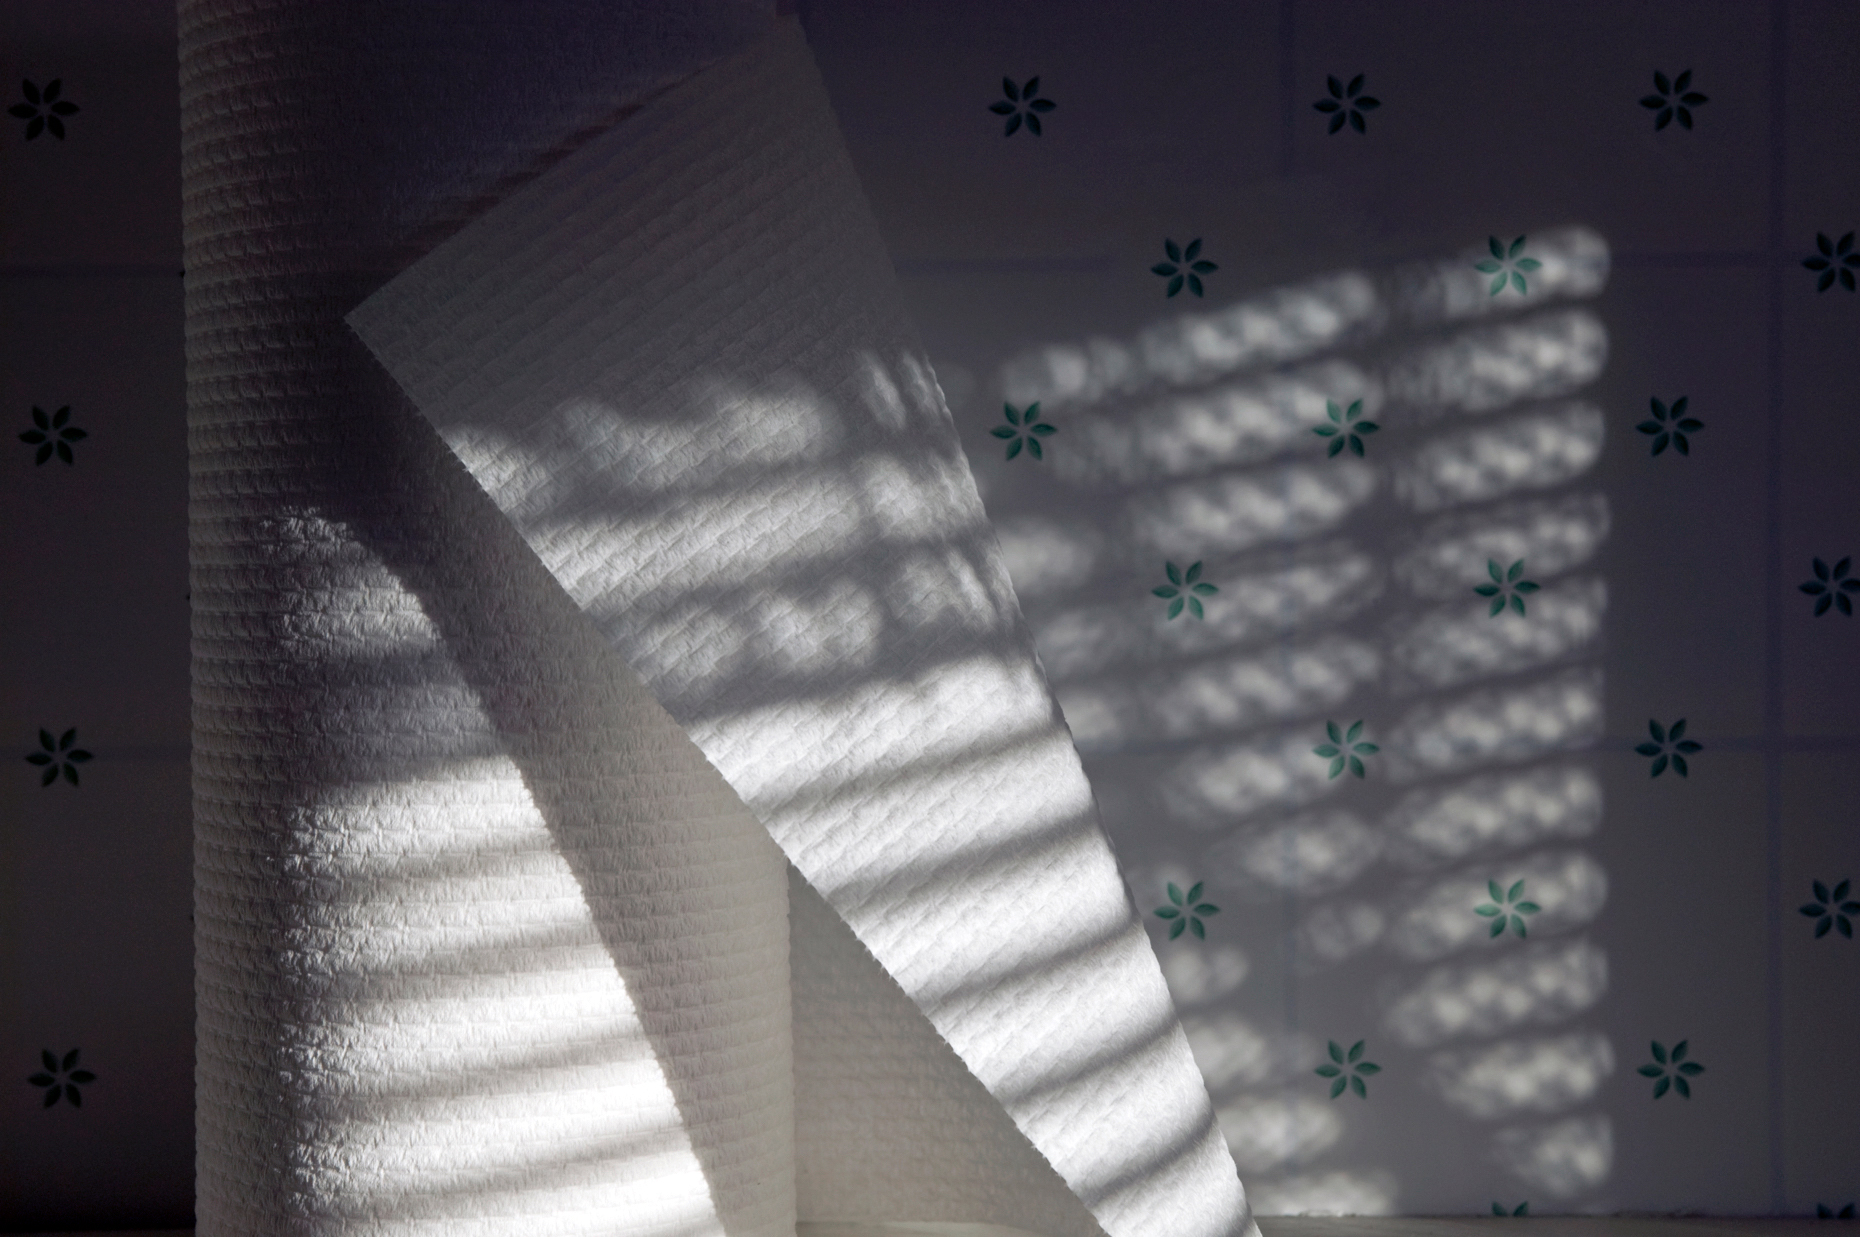 Sunlight streaming through venetian blinds create a striped pattern of shadows on a roll of paper towel.